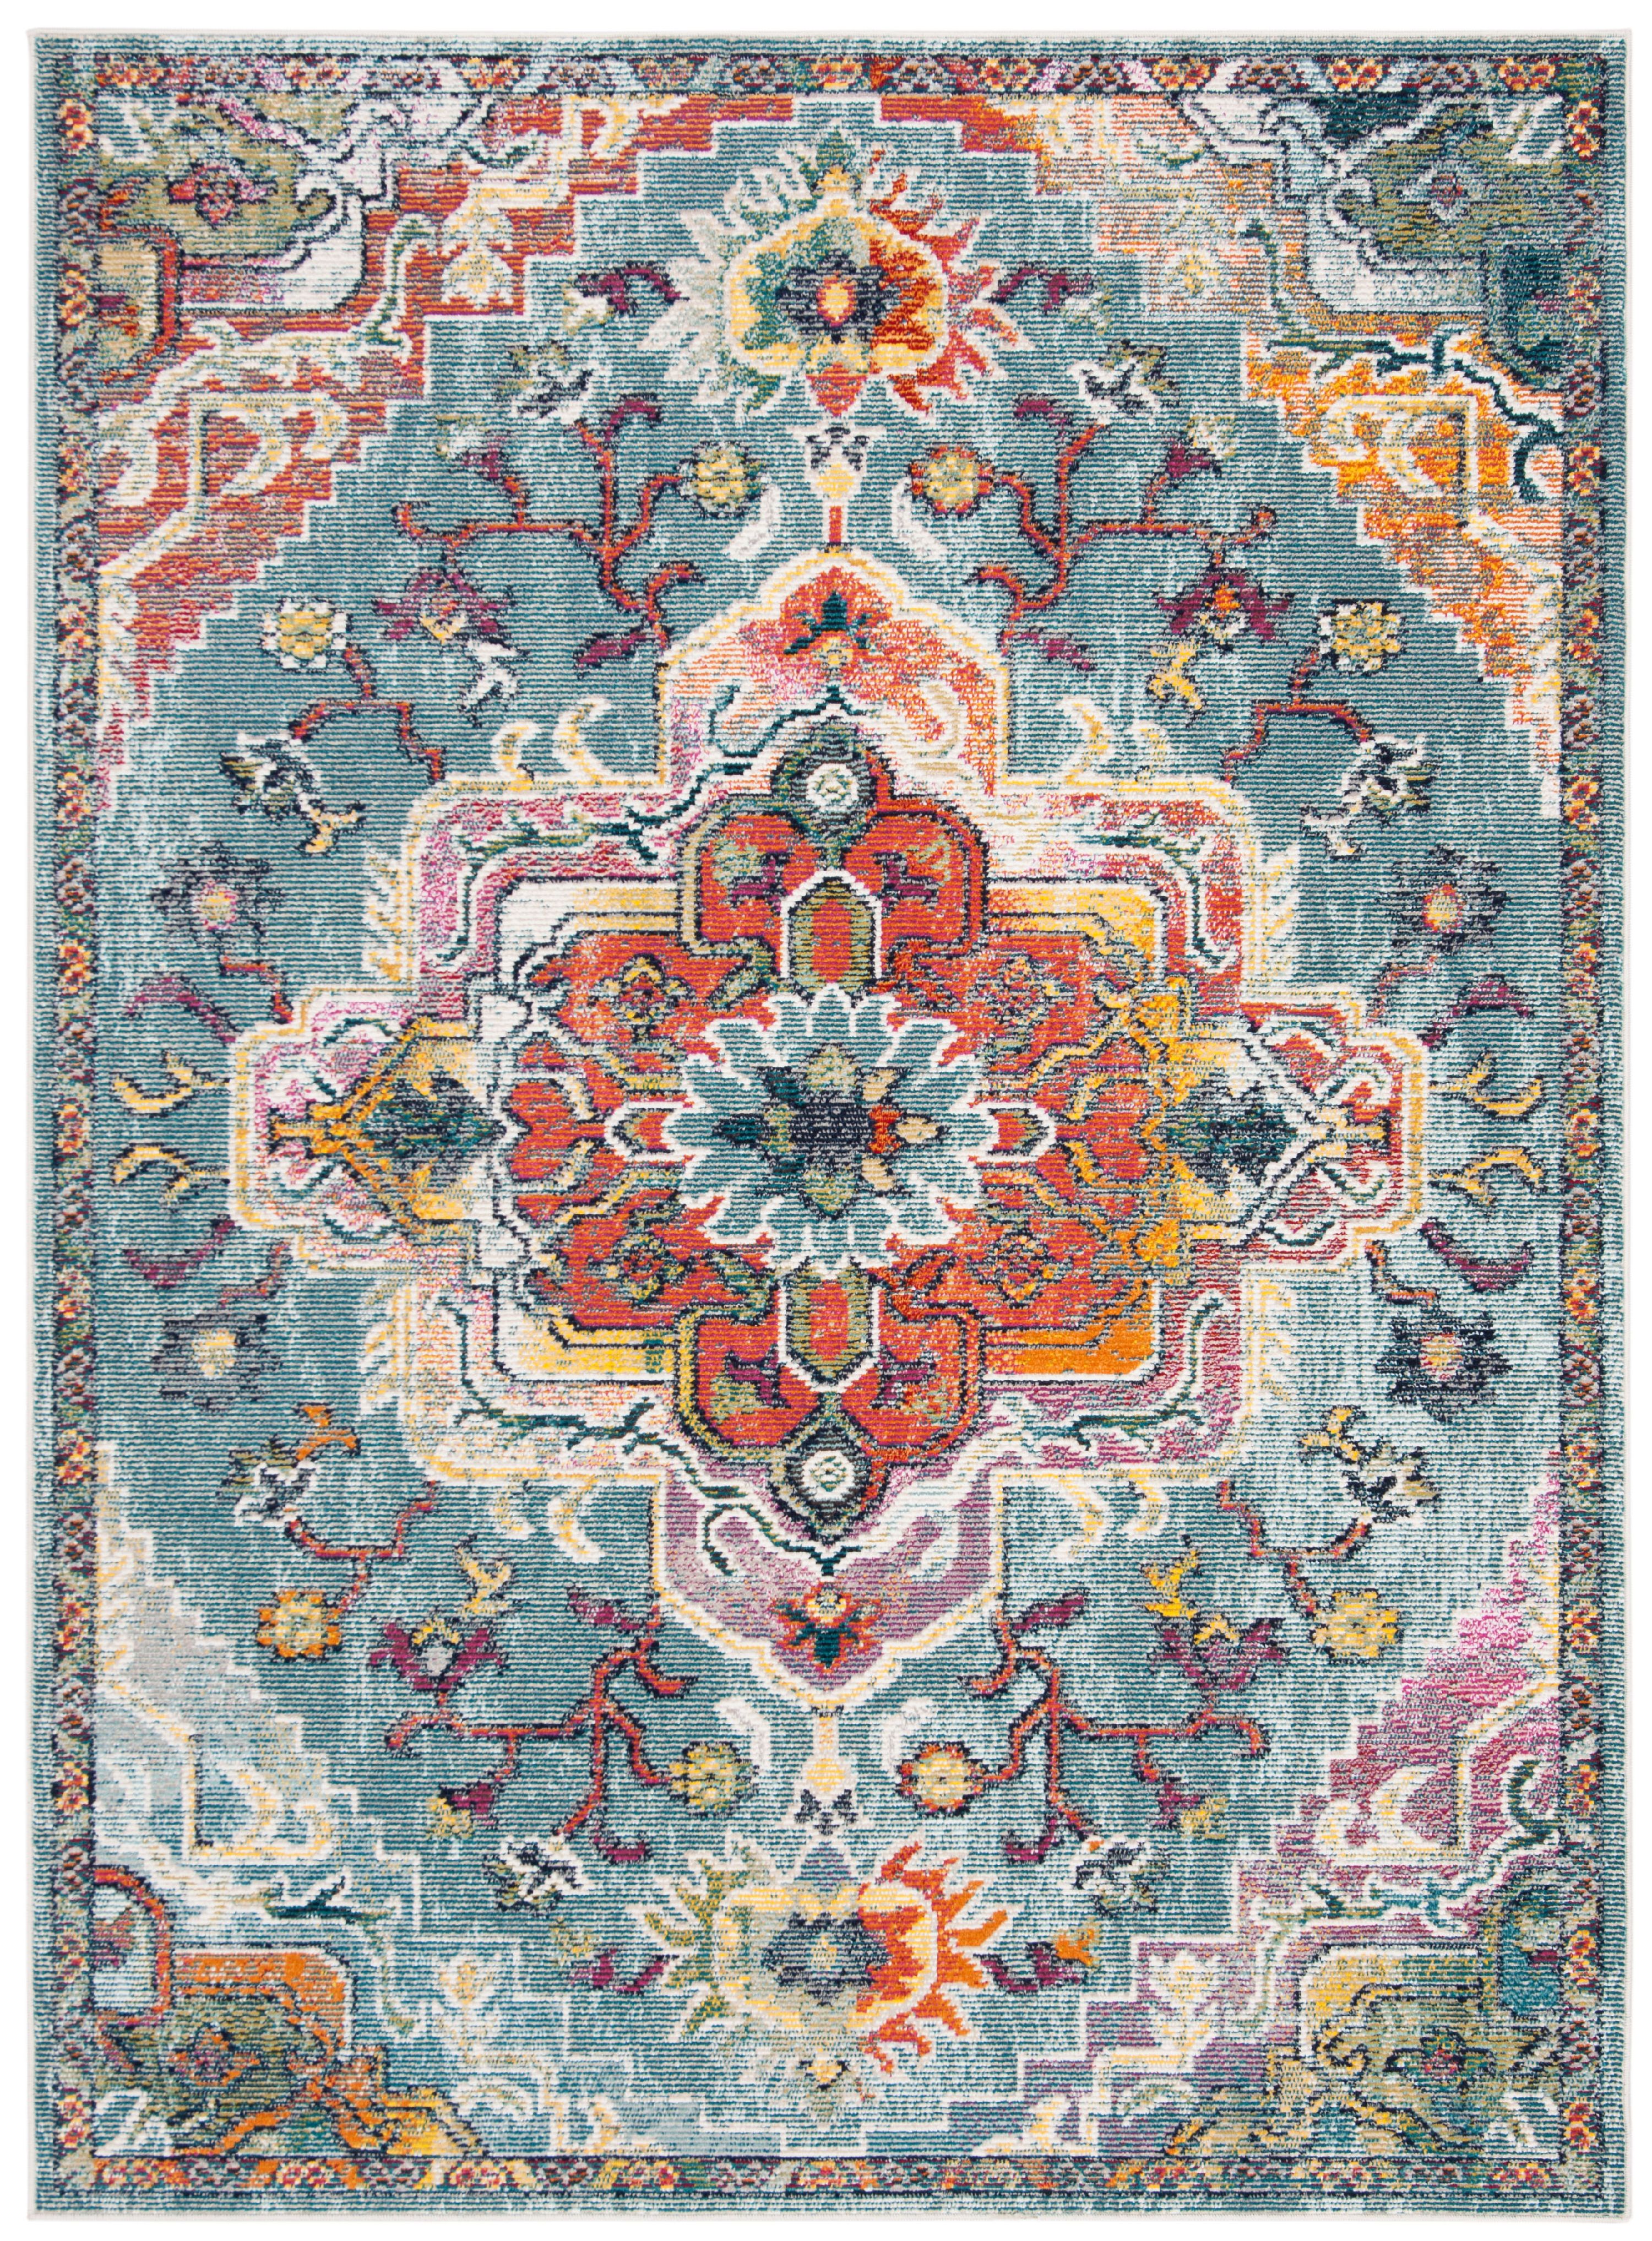 Safavieh Crystal 5' x 8' Rug in Teal and Red - image 2 of 9